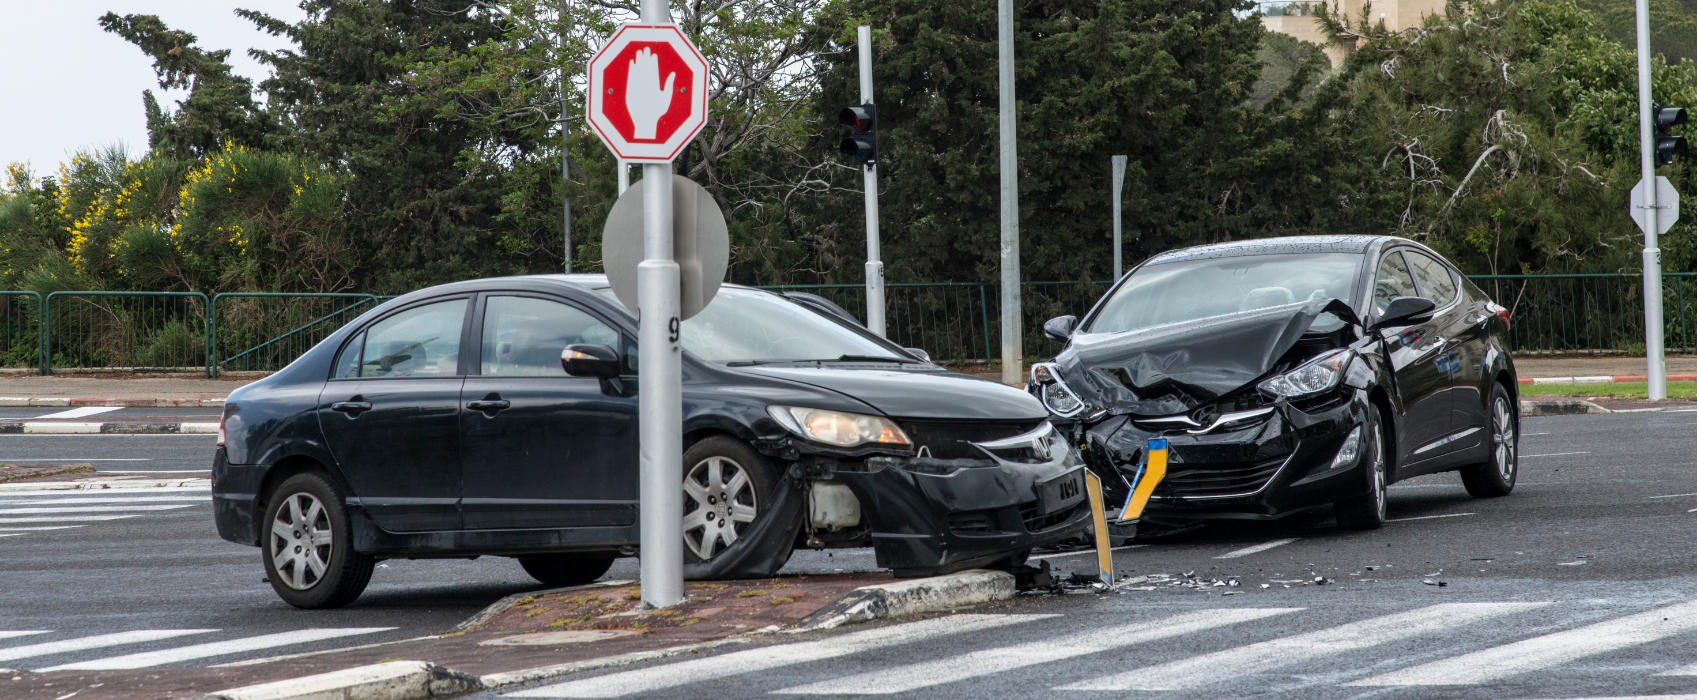 car accident at an intersection, East Point car accident lawyers | Car accident attorneys in East Point GA